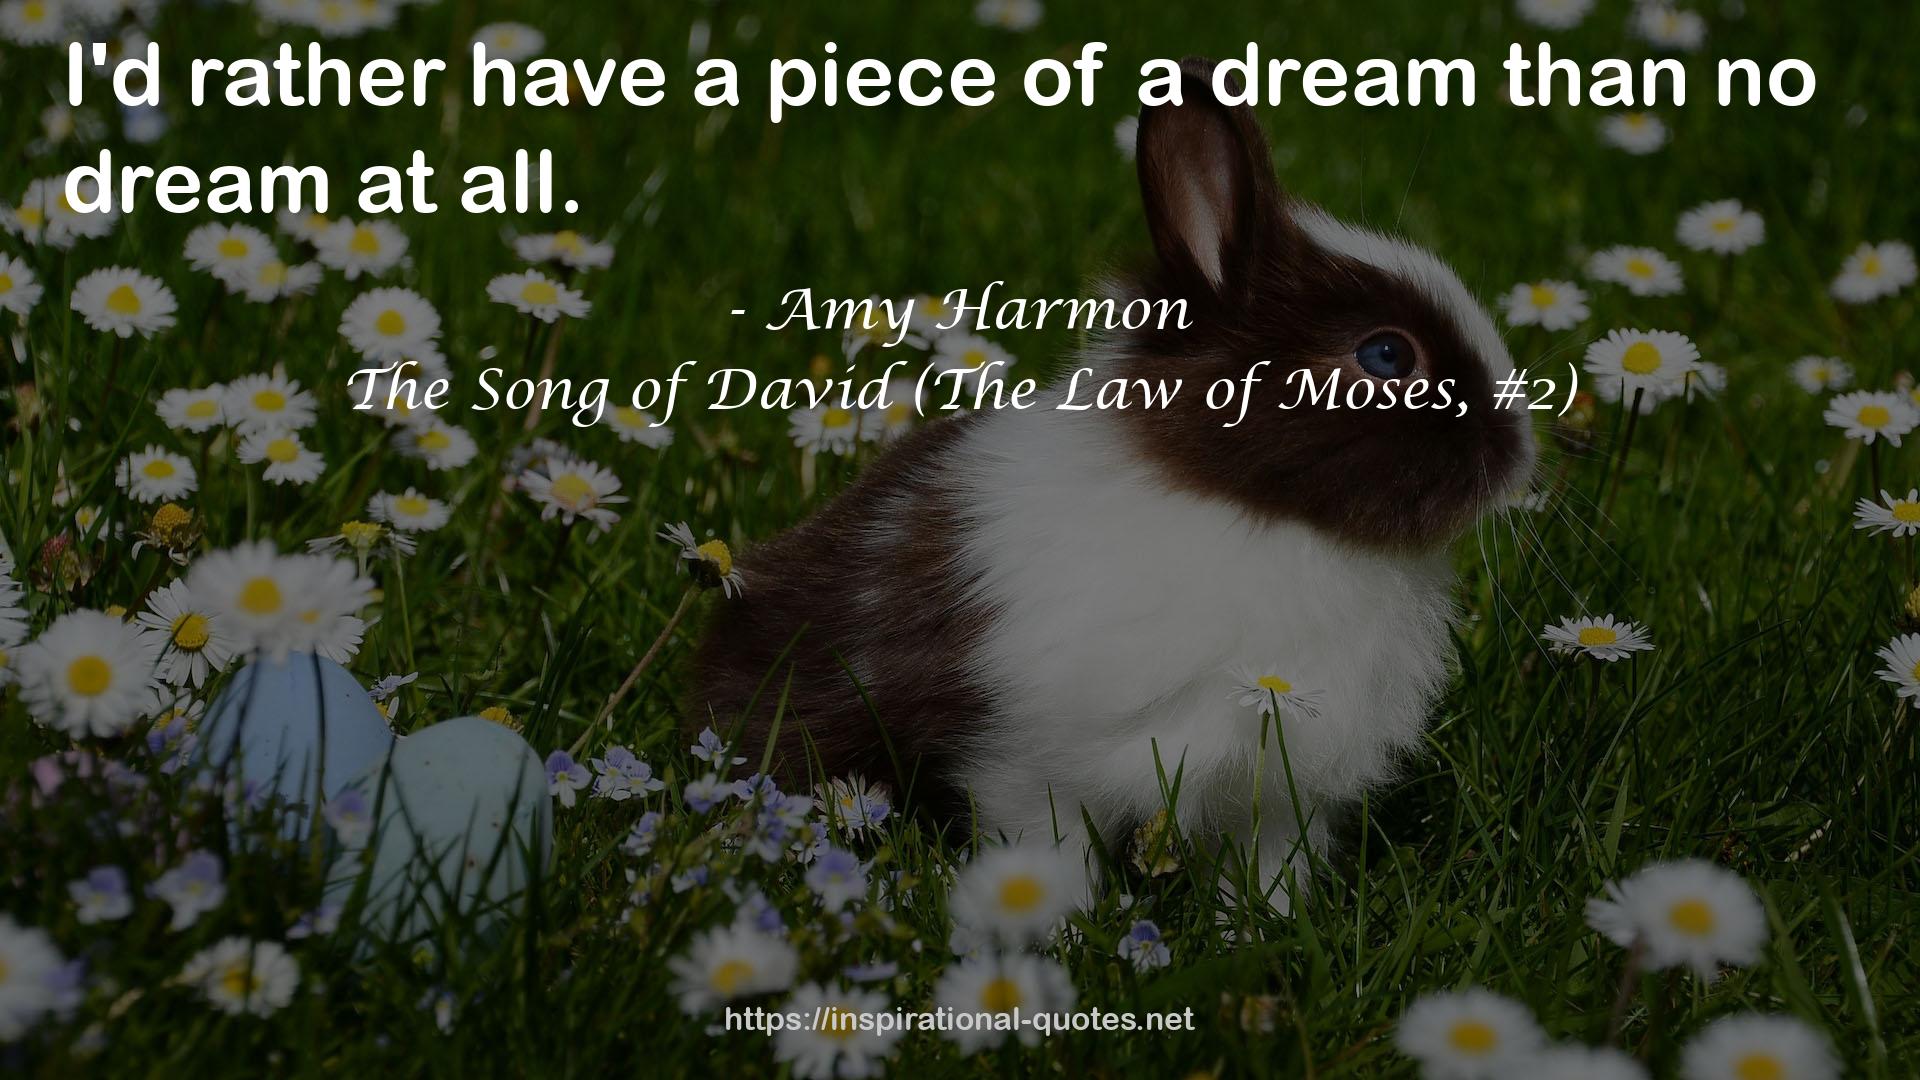 The Song of David (The Law of Moses, #2) QUOTES